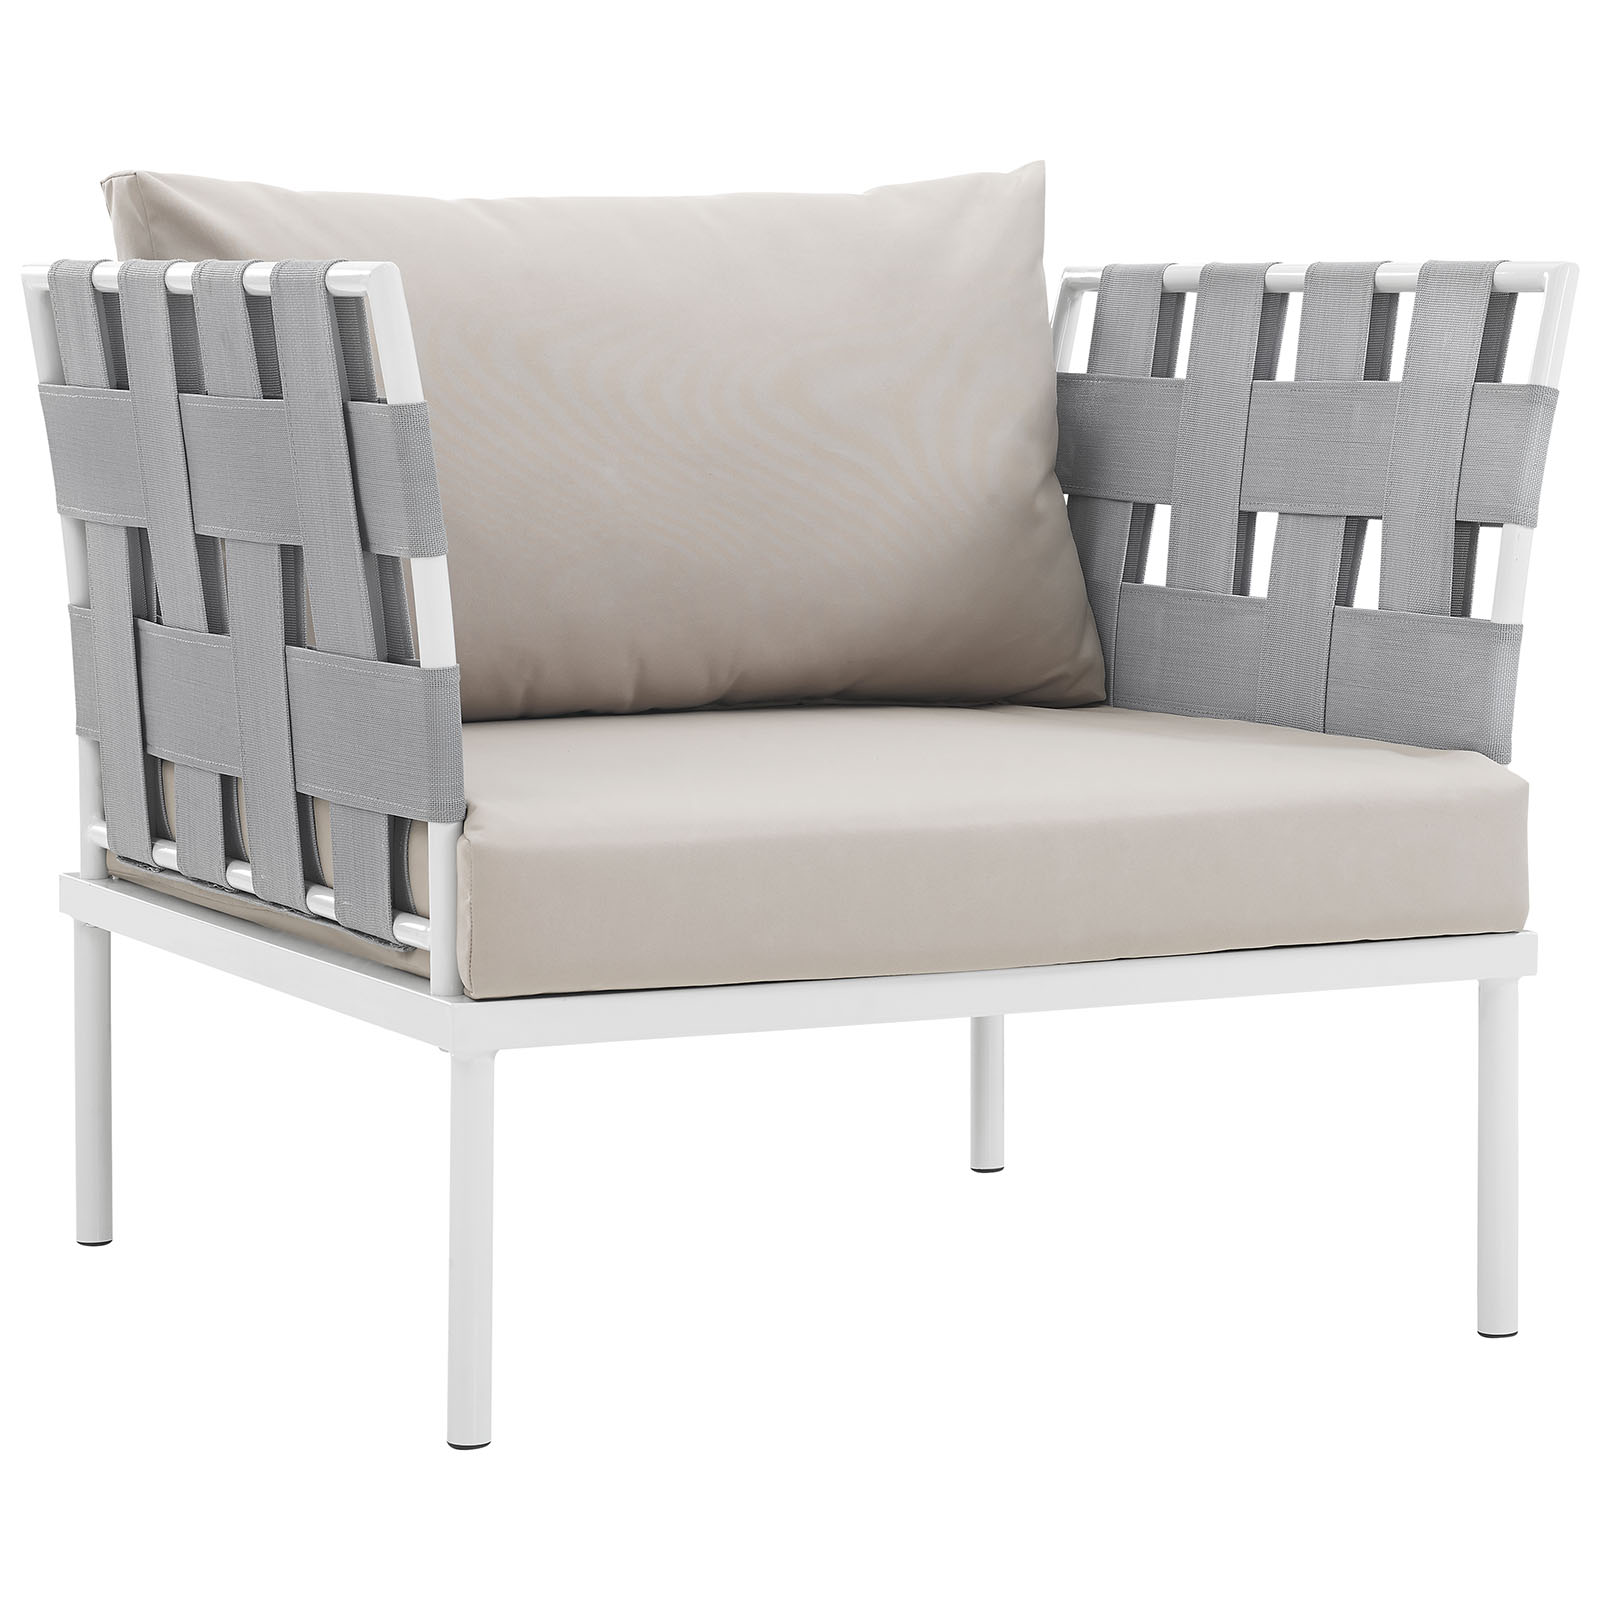 Modern Contemporary Urban Design Outdoor Patio Balcony Lounge Chair, Beige White, Rattan - image 1 of 5